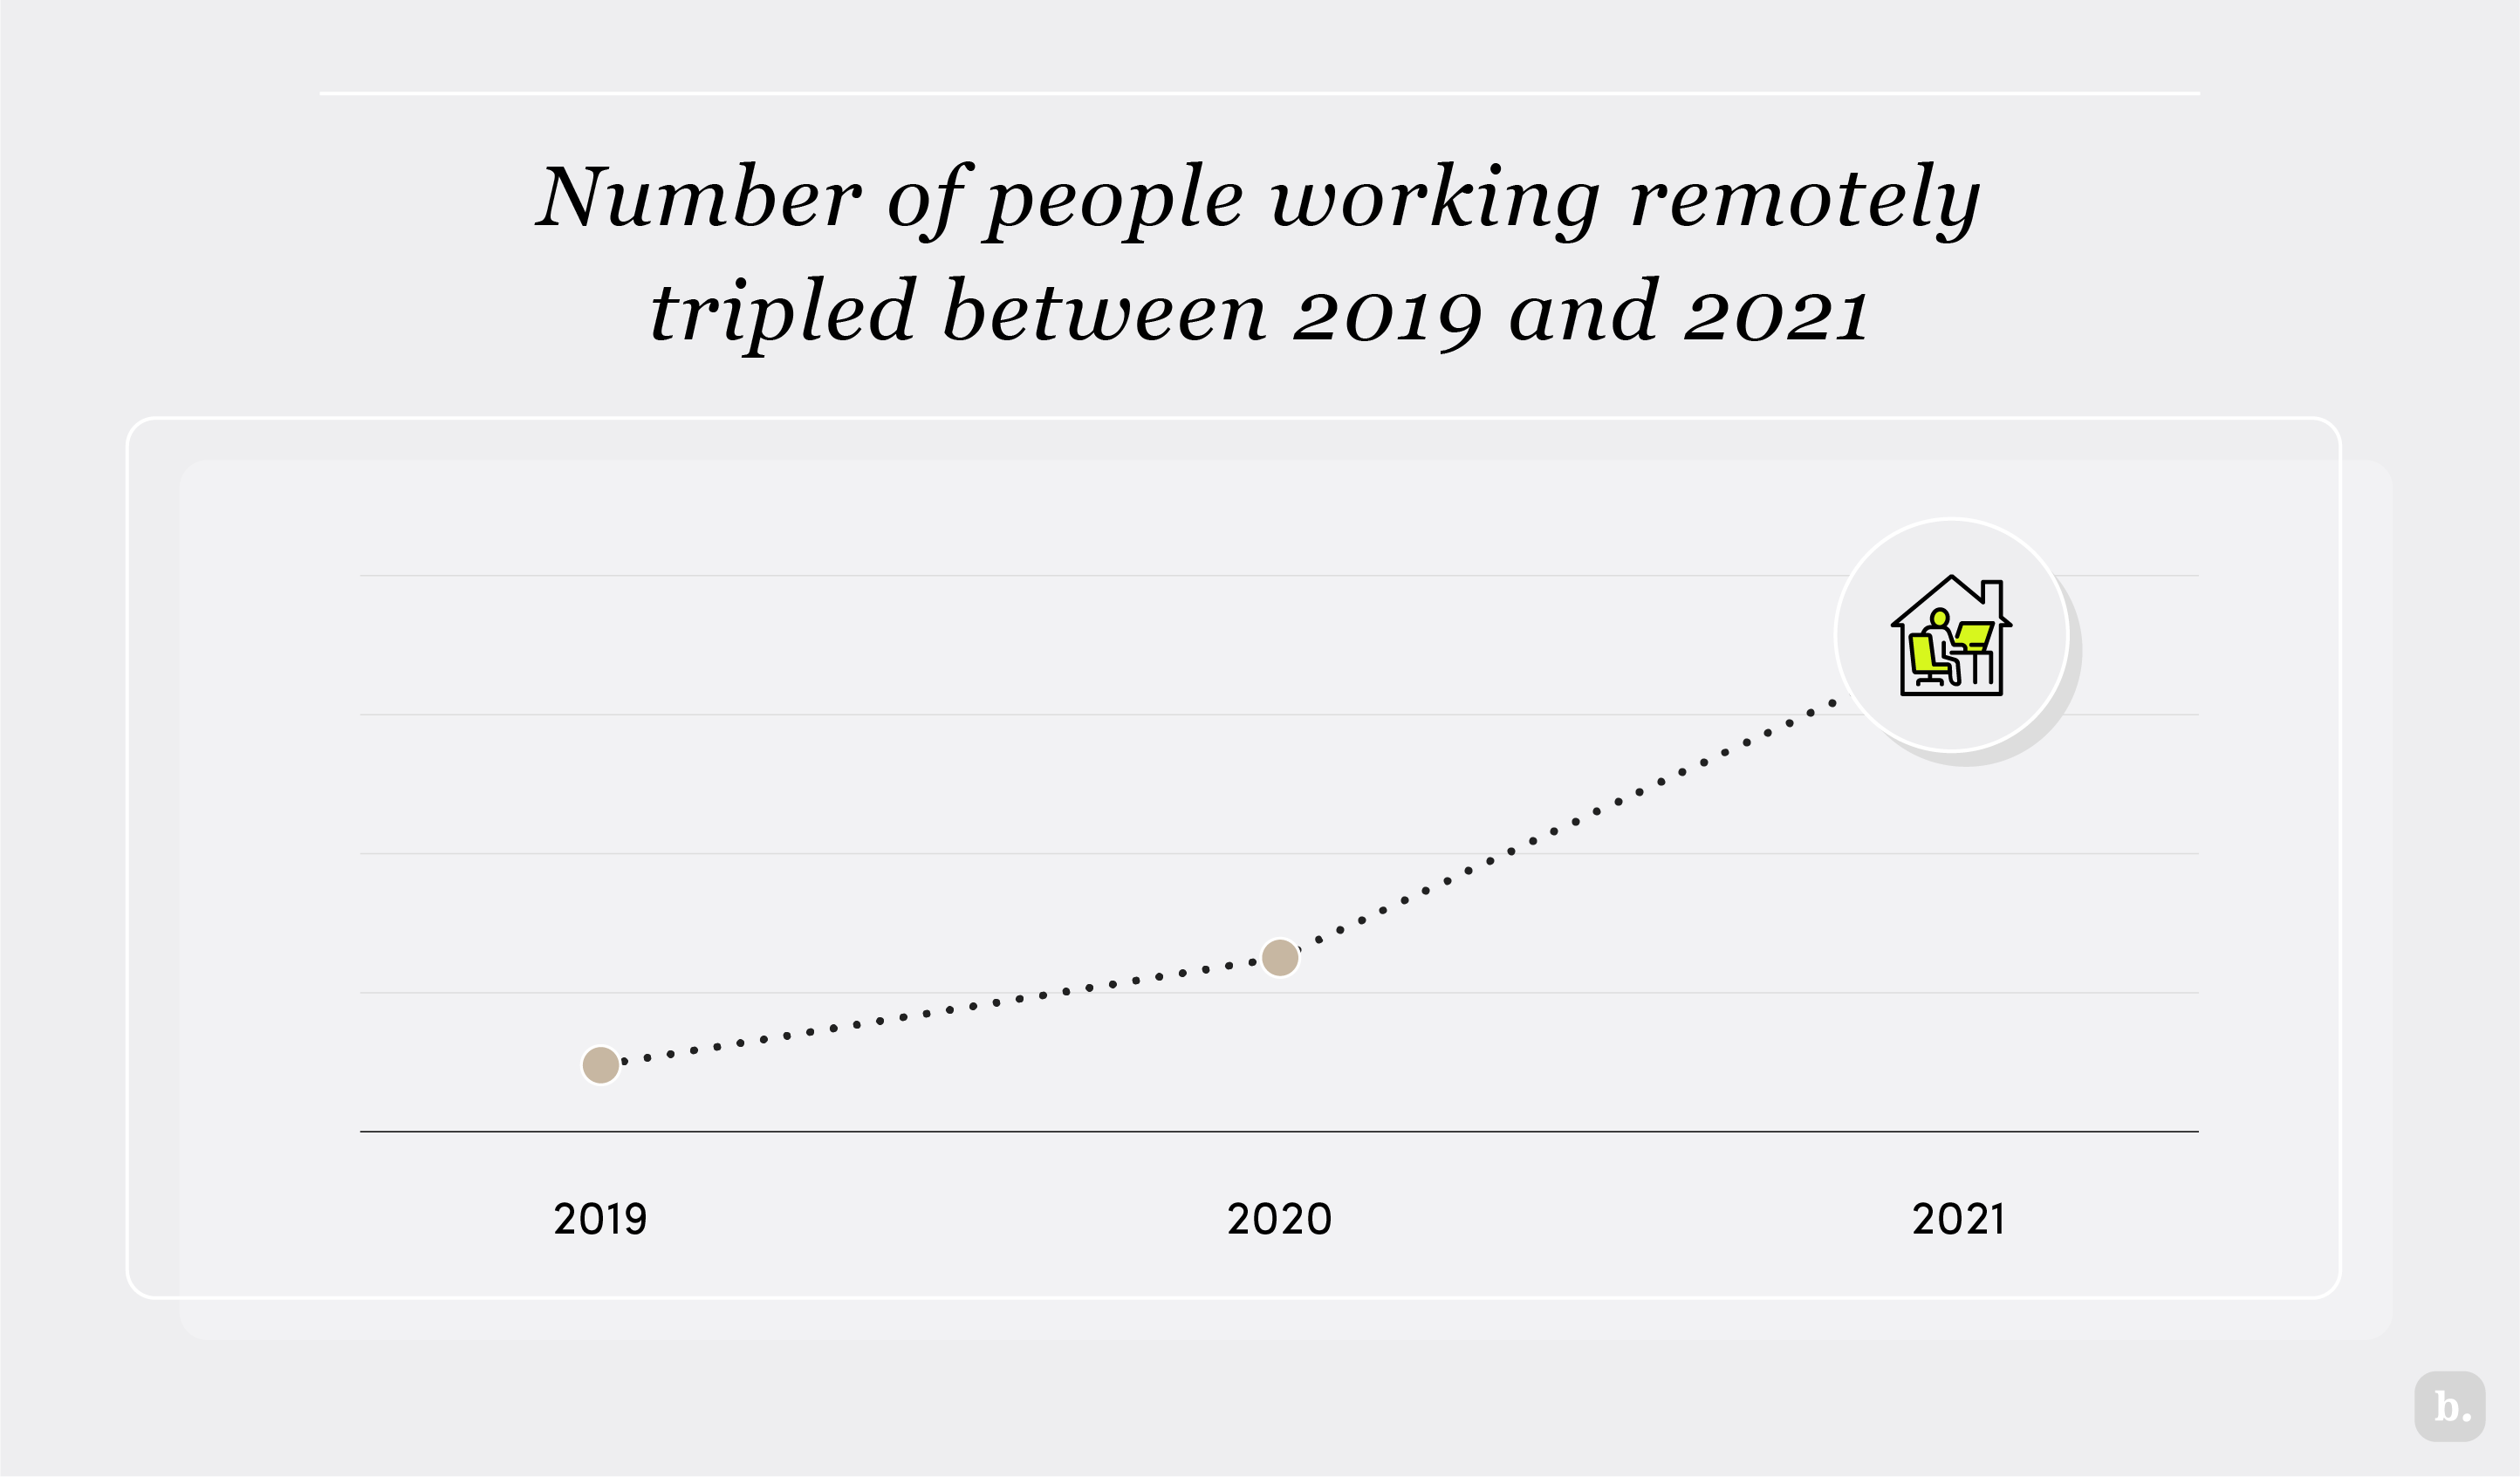 Number of people working remotely tripled between 2019 and 2021 graph